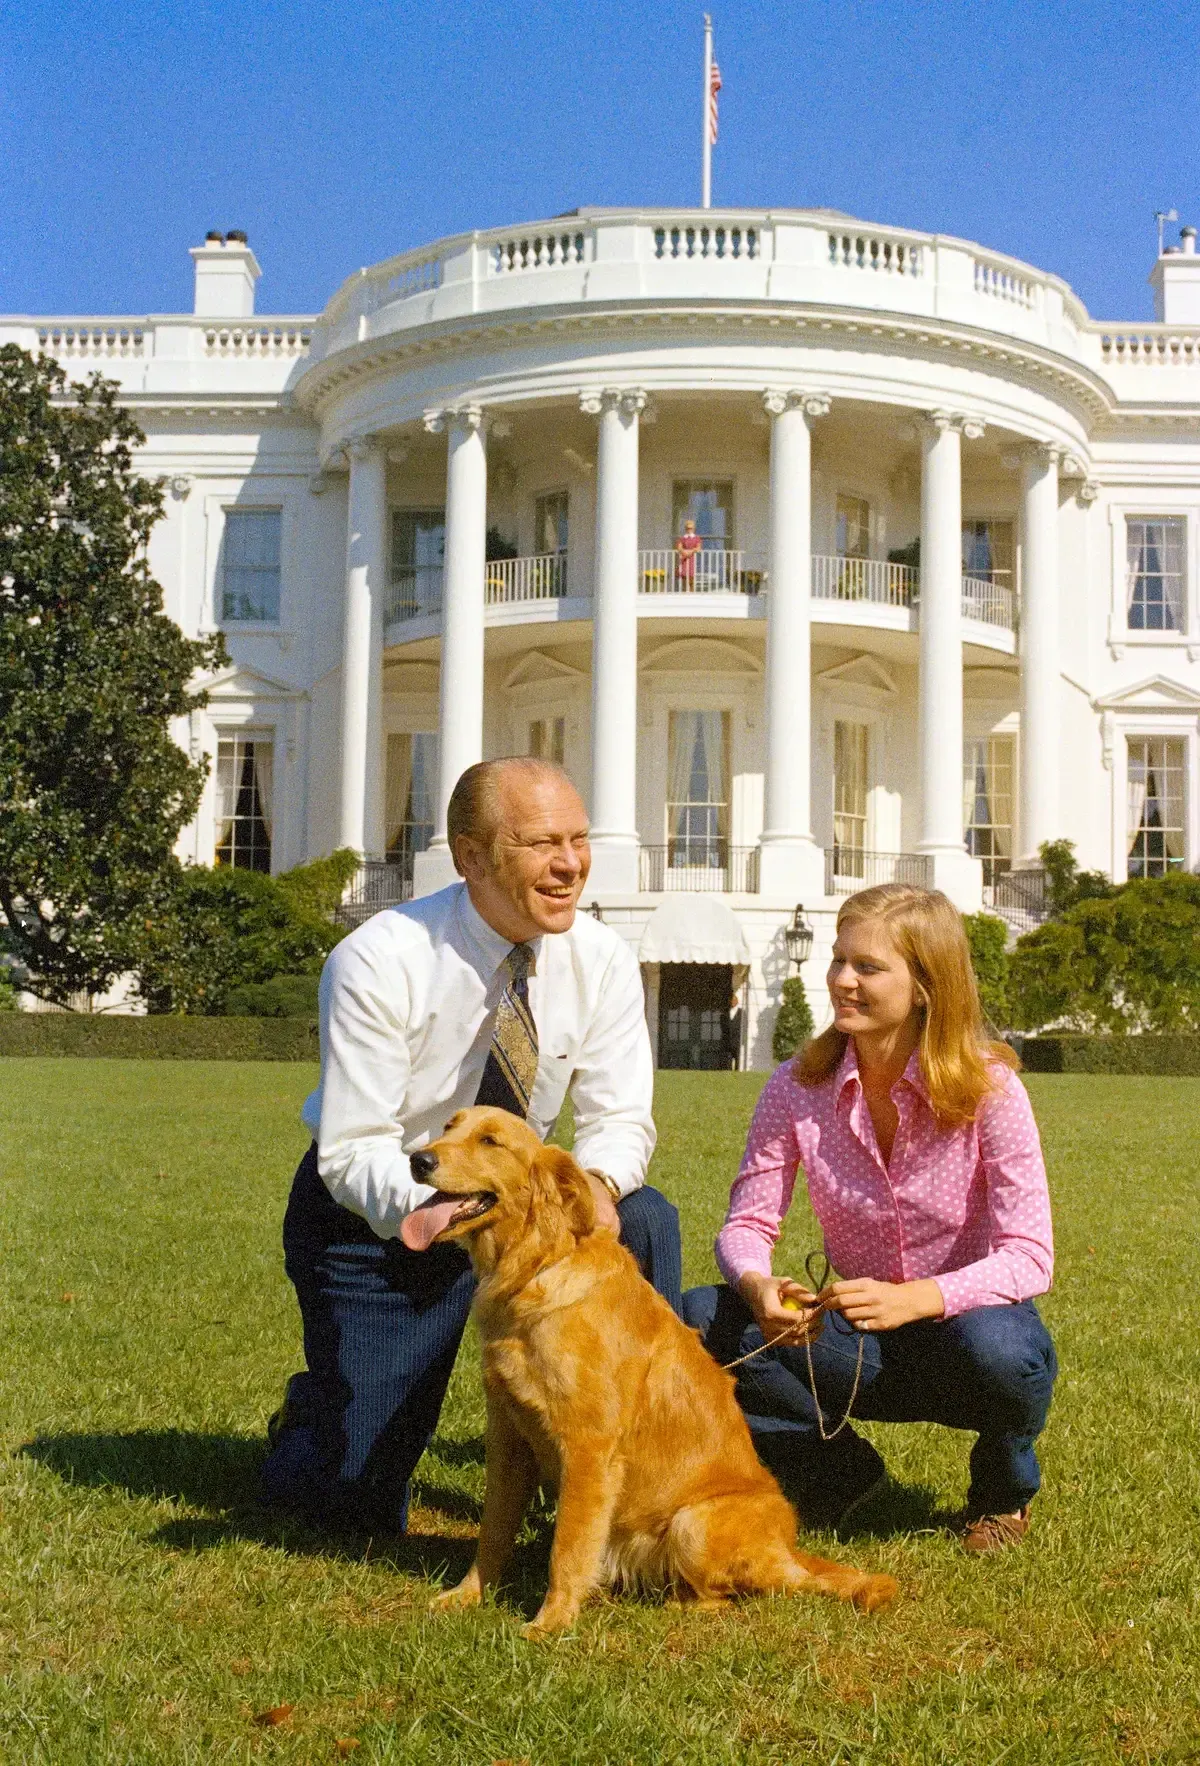 President Ford and his daughter with their dog, Liberty. THE LINK HAS BEEN COPIED!